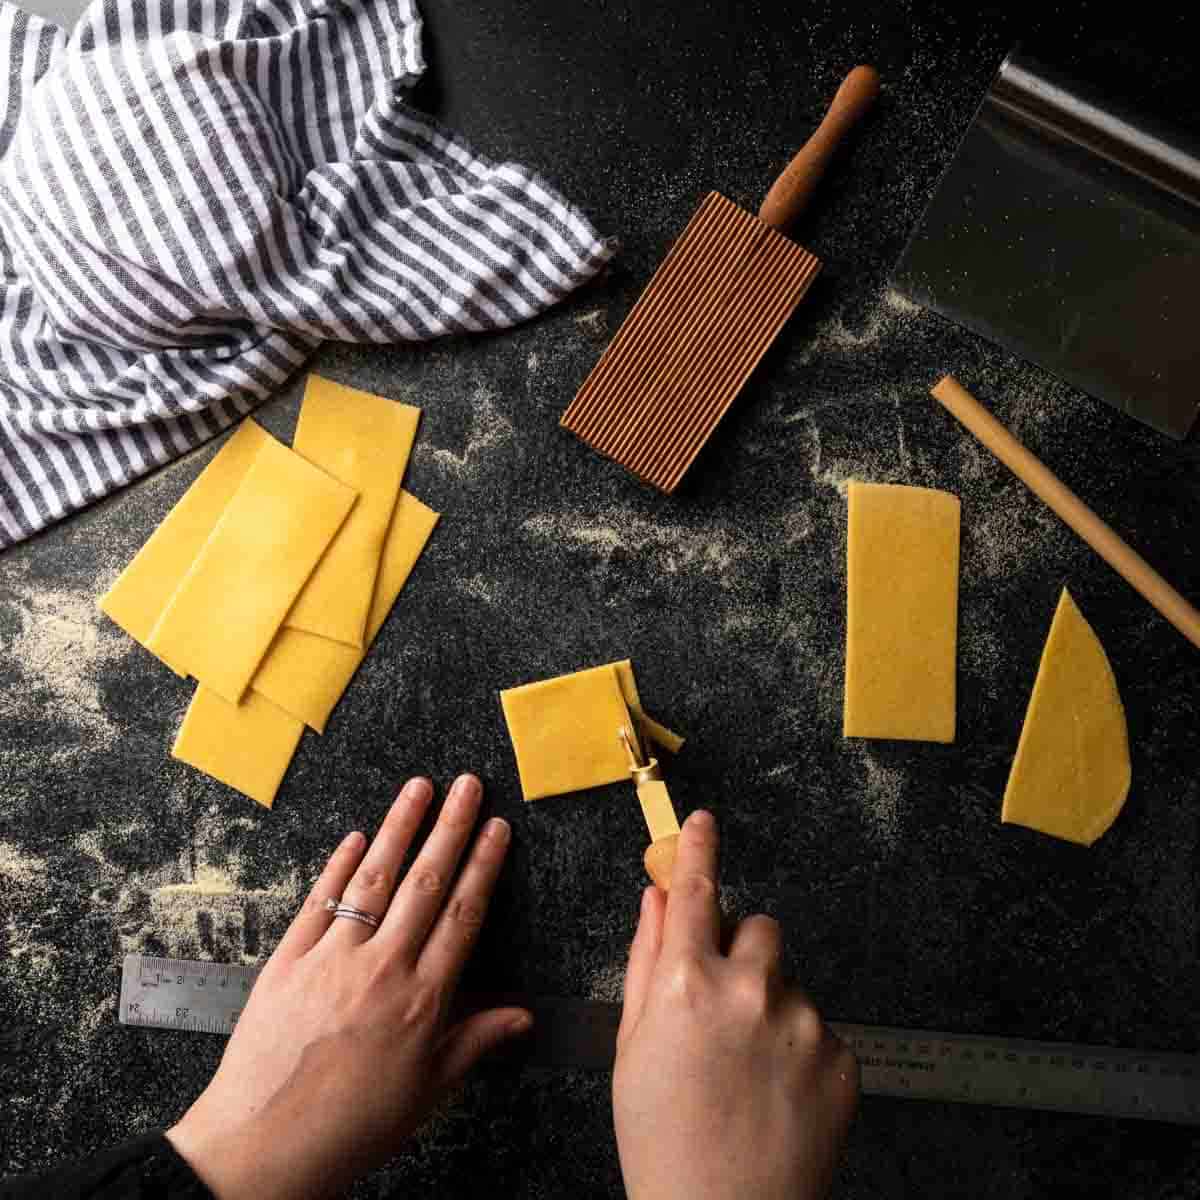 Using a ruler and brass pasta wheel to cut squares of pasta dough